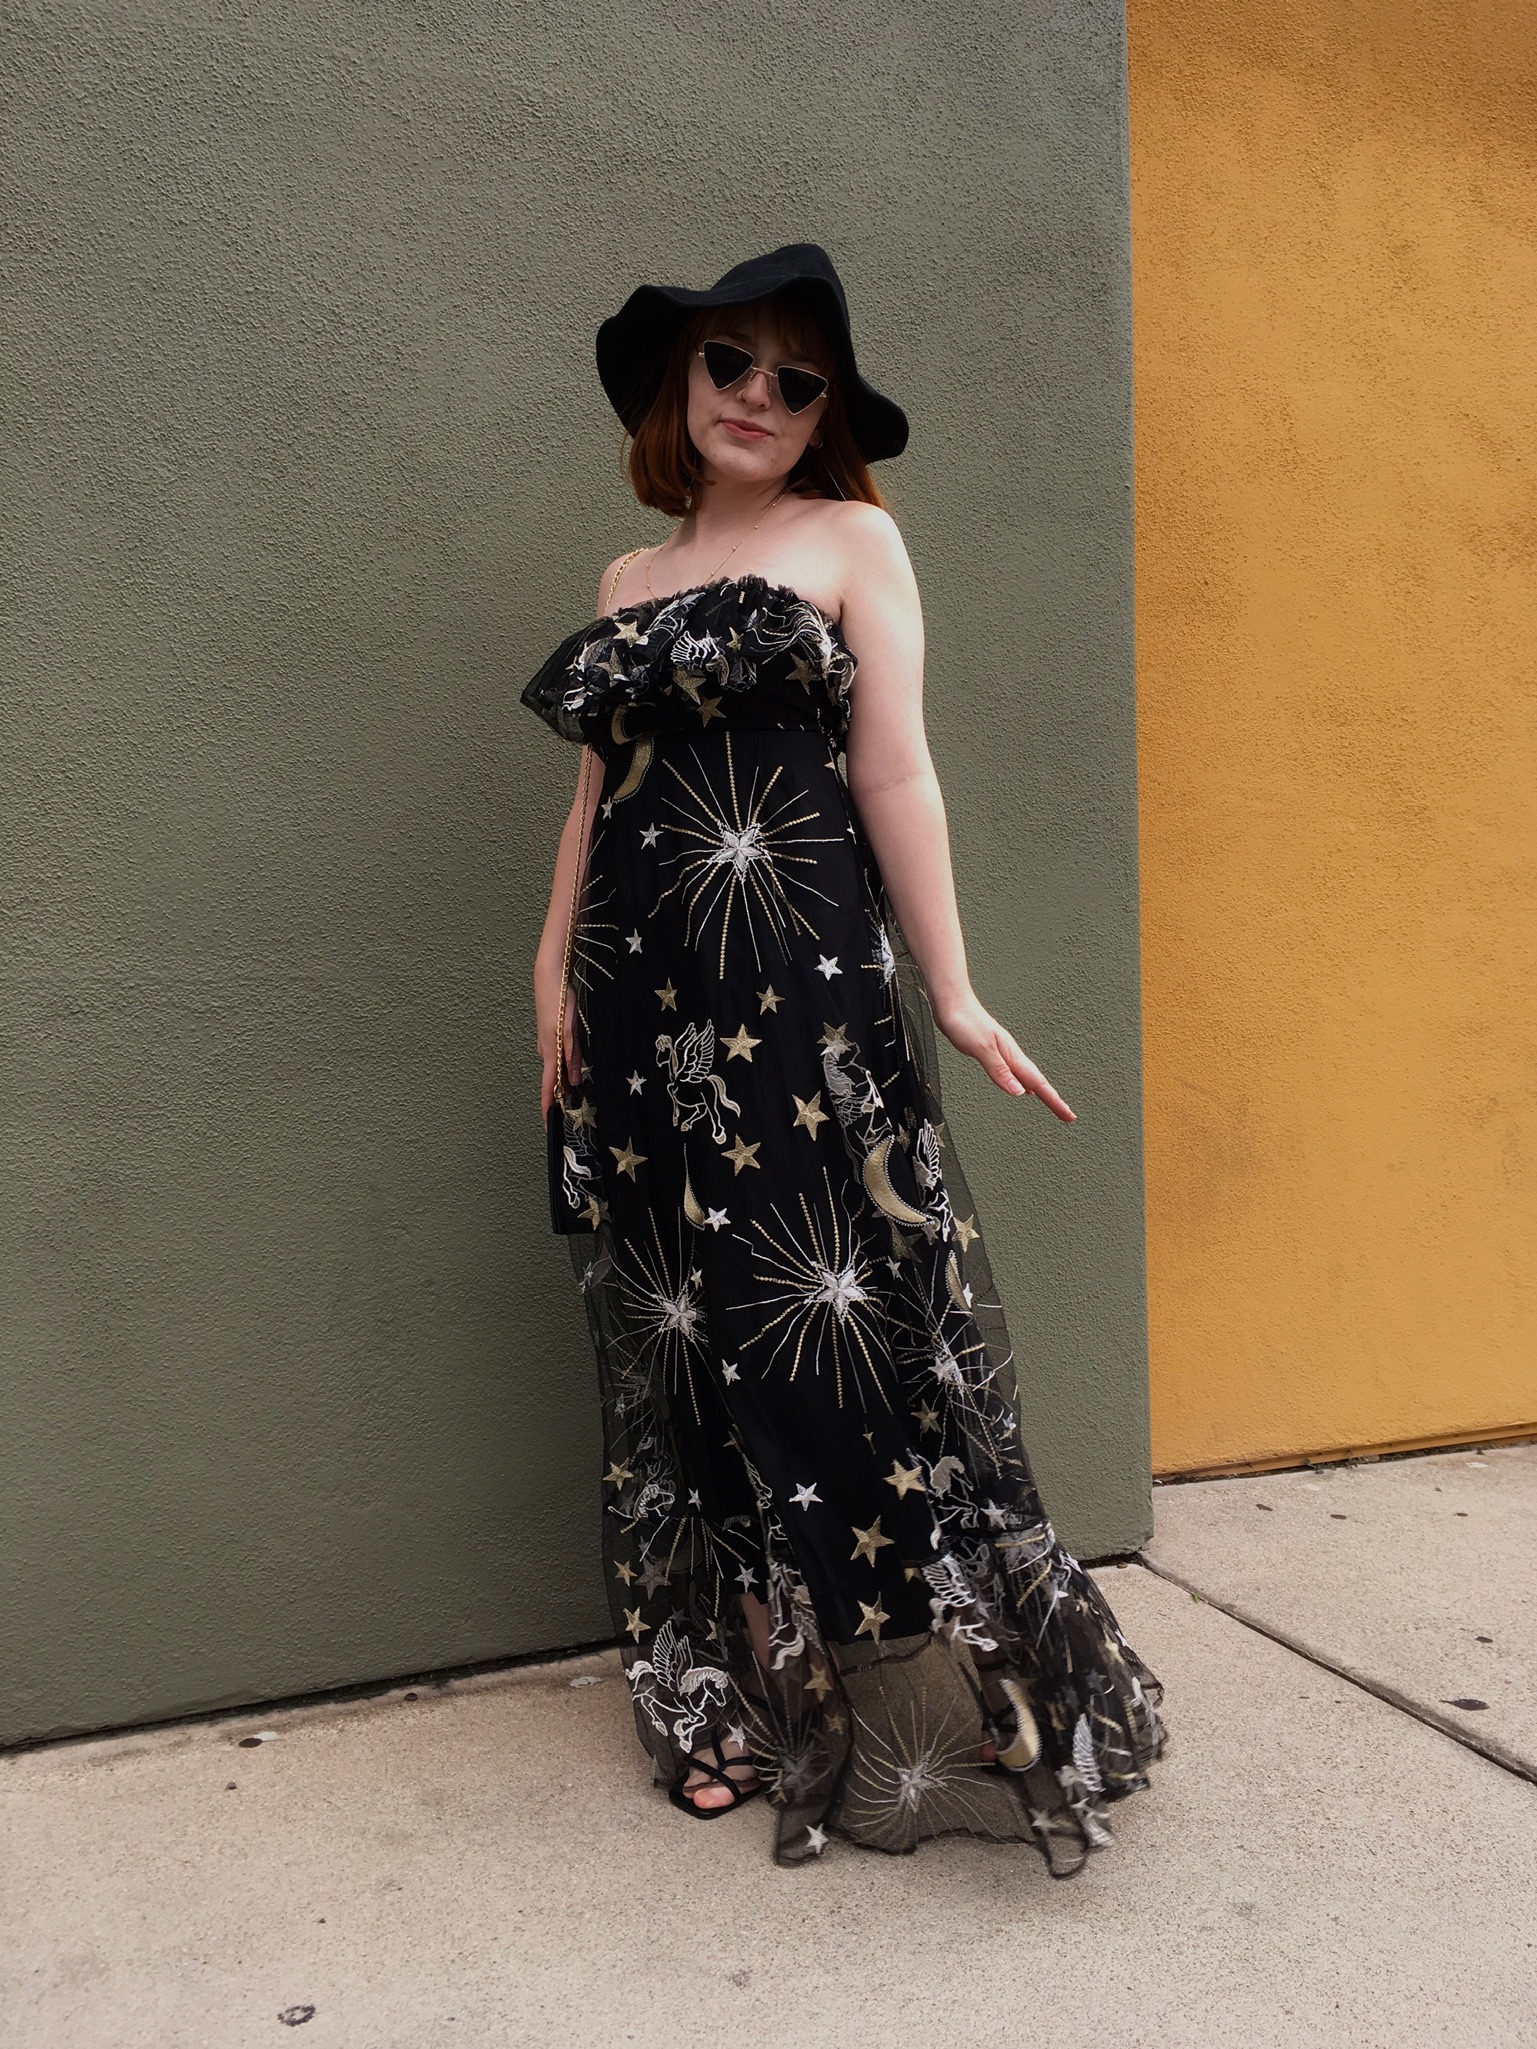 Person standing in front of green wall wearing star pattern dress and black hat